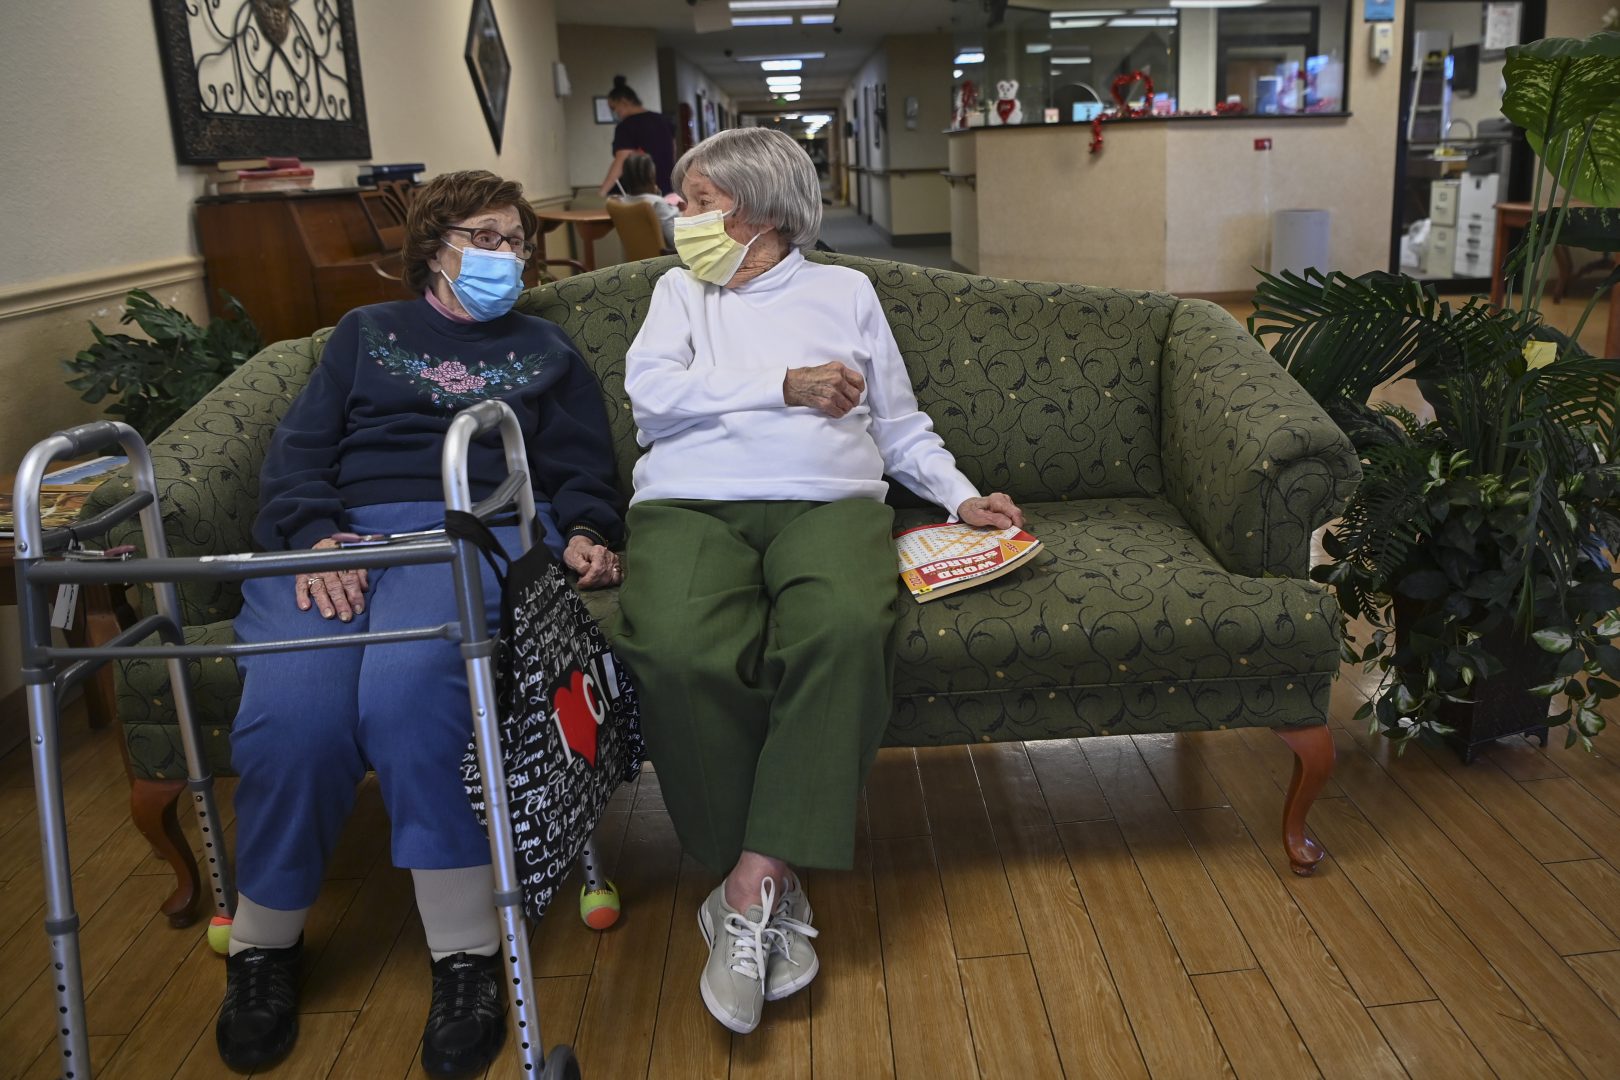 Carmela Sileo, left, and Susan McEachern sit next to each other and talk in the dayroom Wednesday, Feb. 3, 2021, at Arbor Springs Health and Rehabilitation Center in Opelika, Ala. 